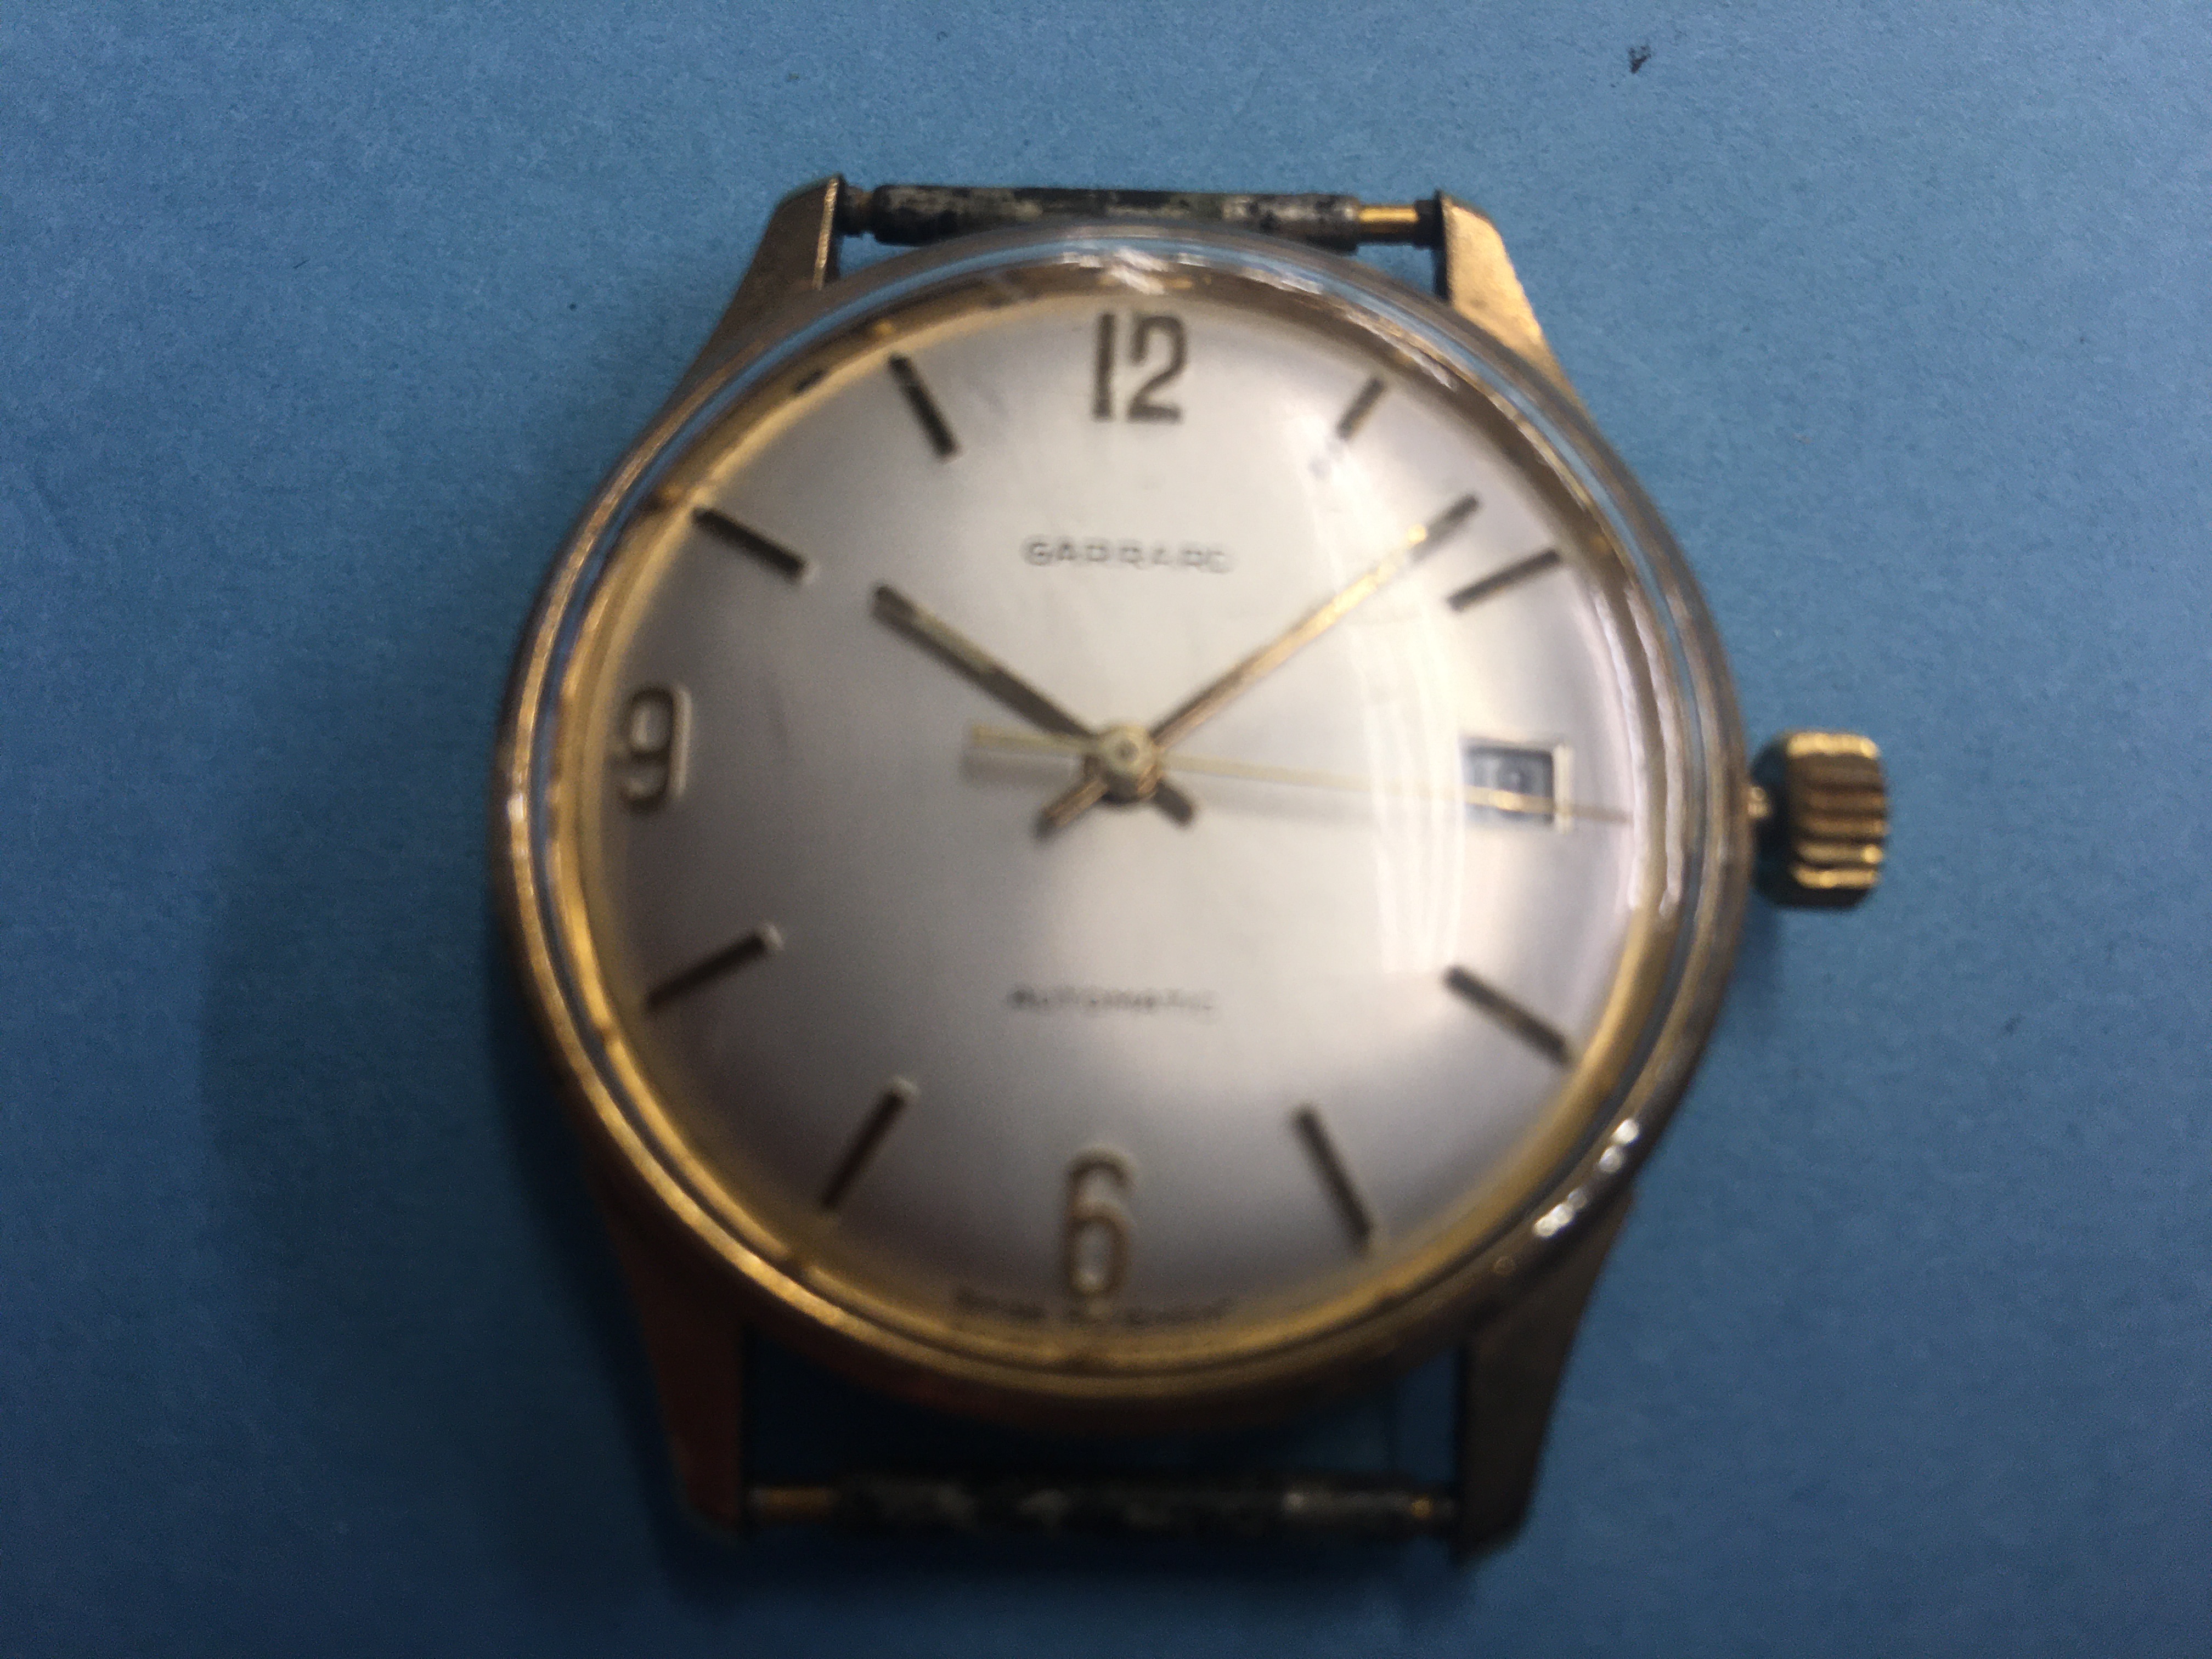 A Gentleman's Garrard automatic wristwatch with batons and numerals, with date apertures